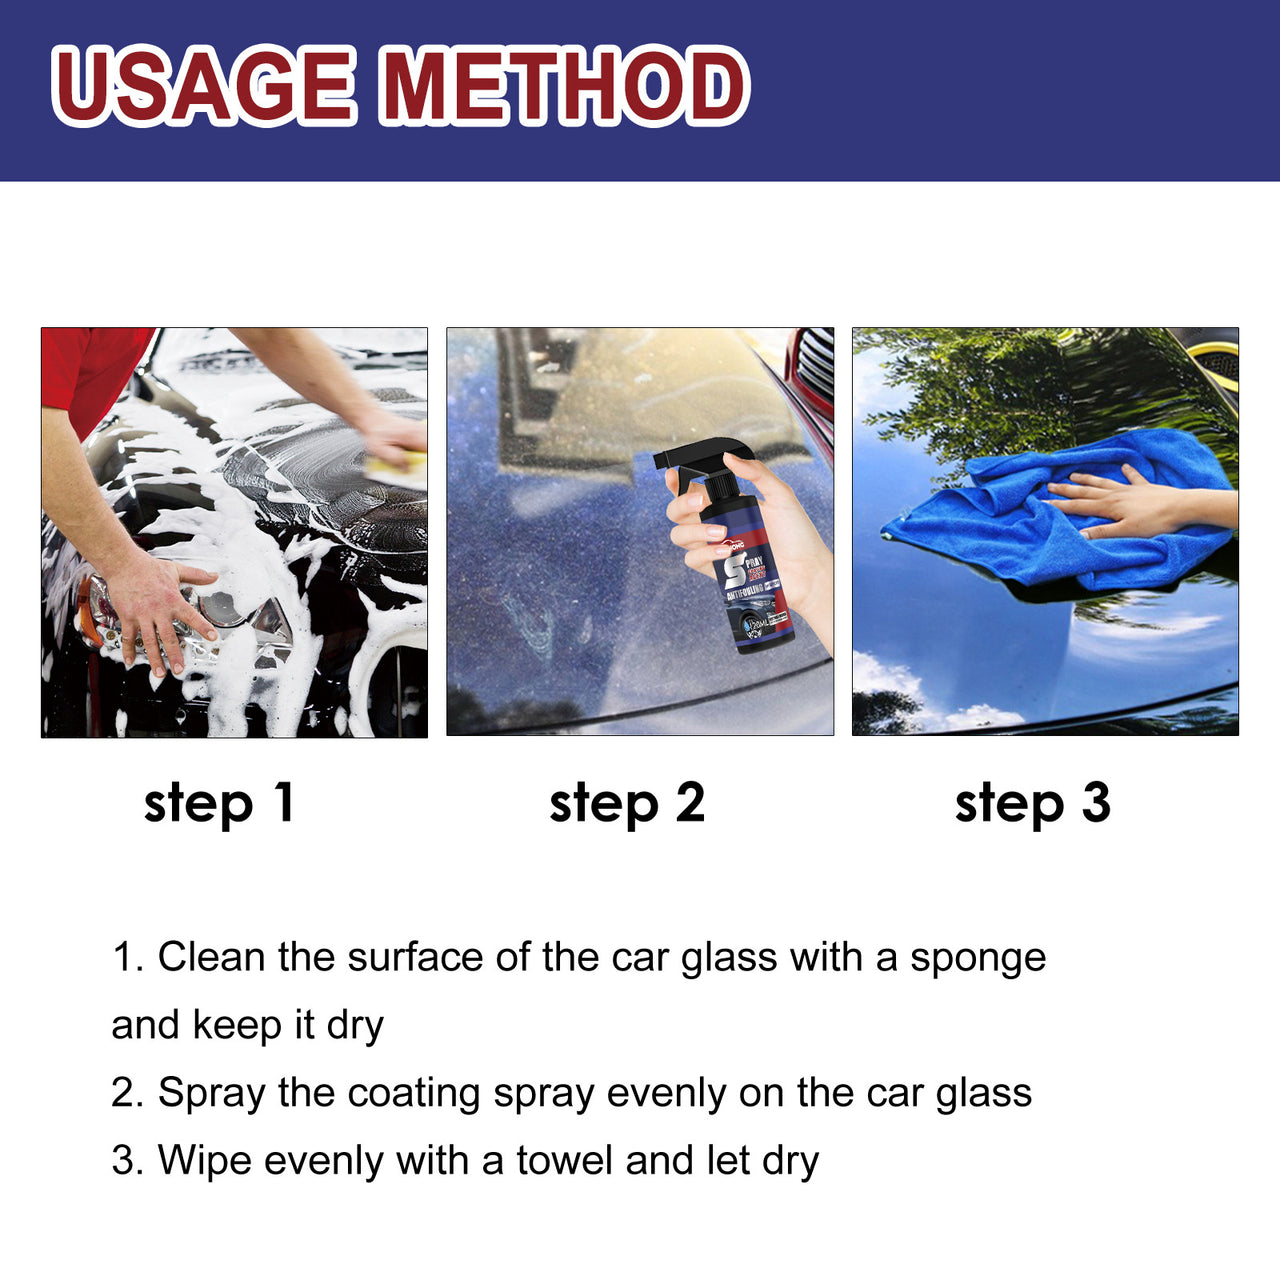 Spray Coating Agent for Cars